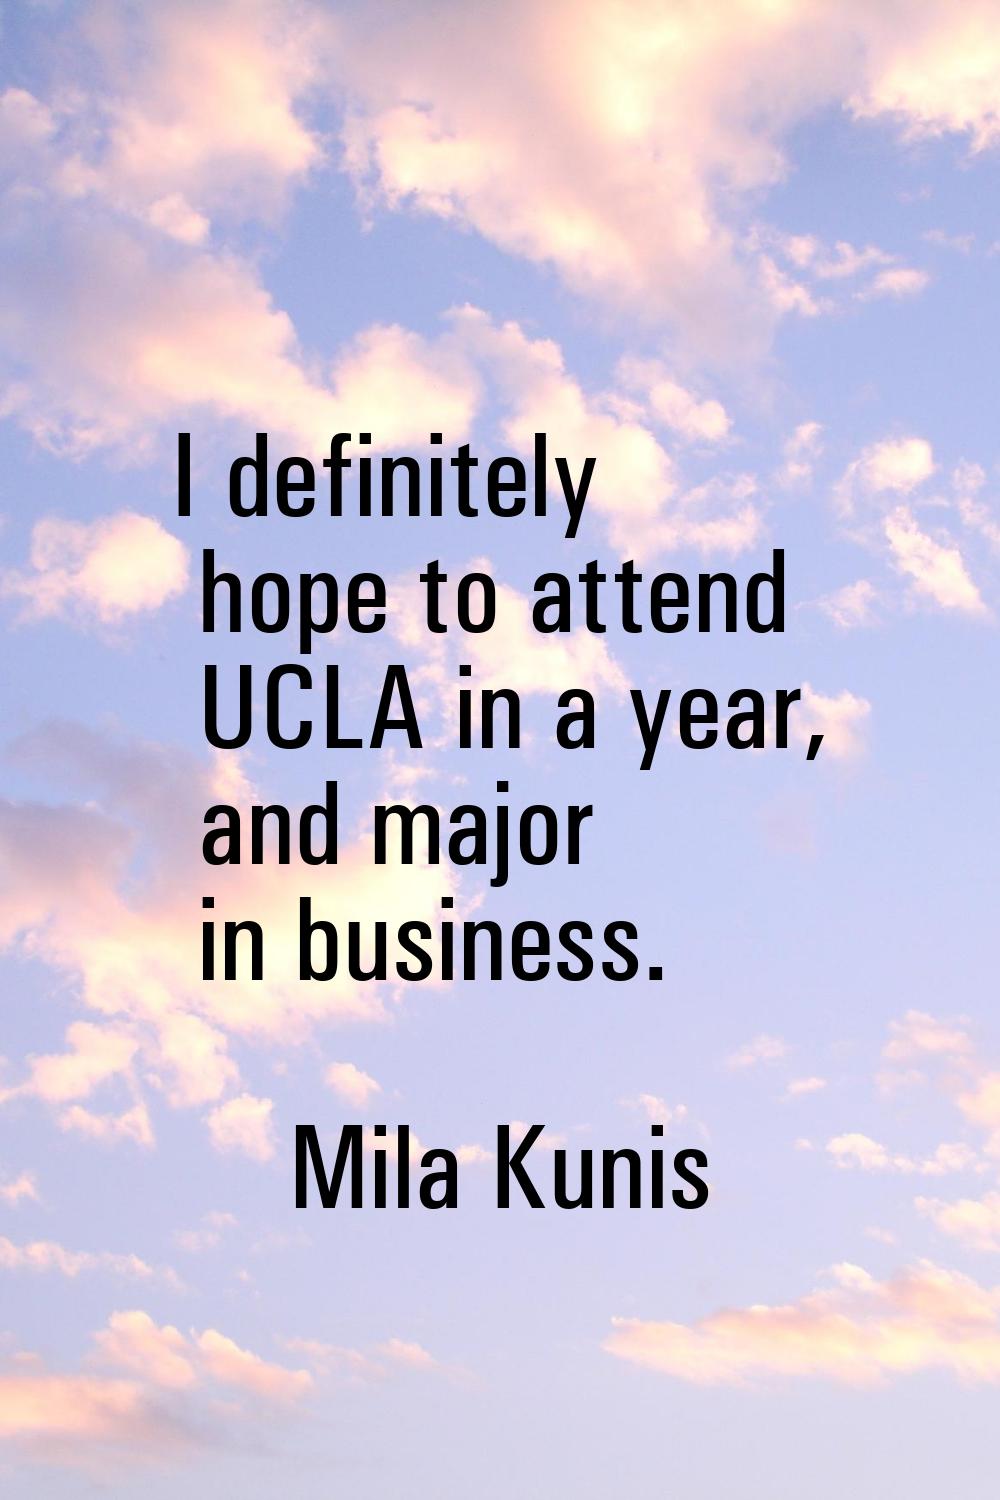 I definitely hope to attend UCLA in a year, and major in business.